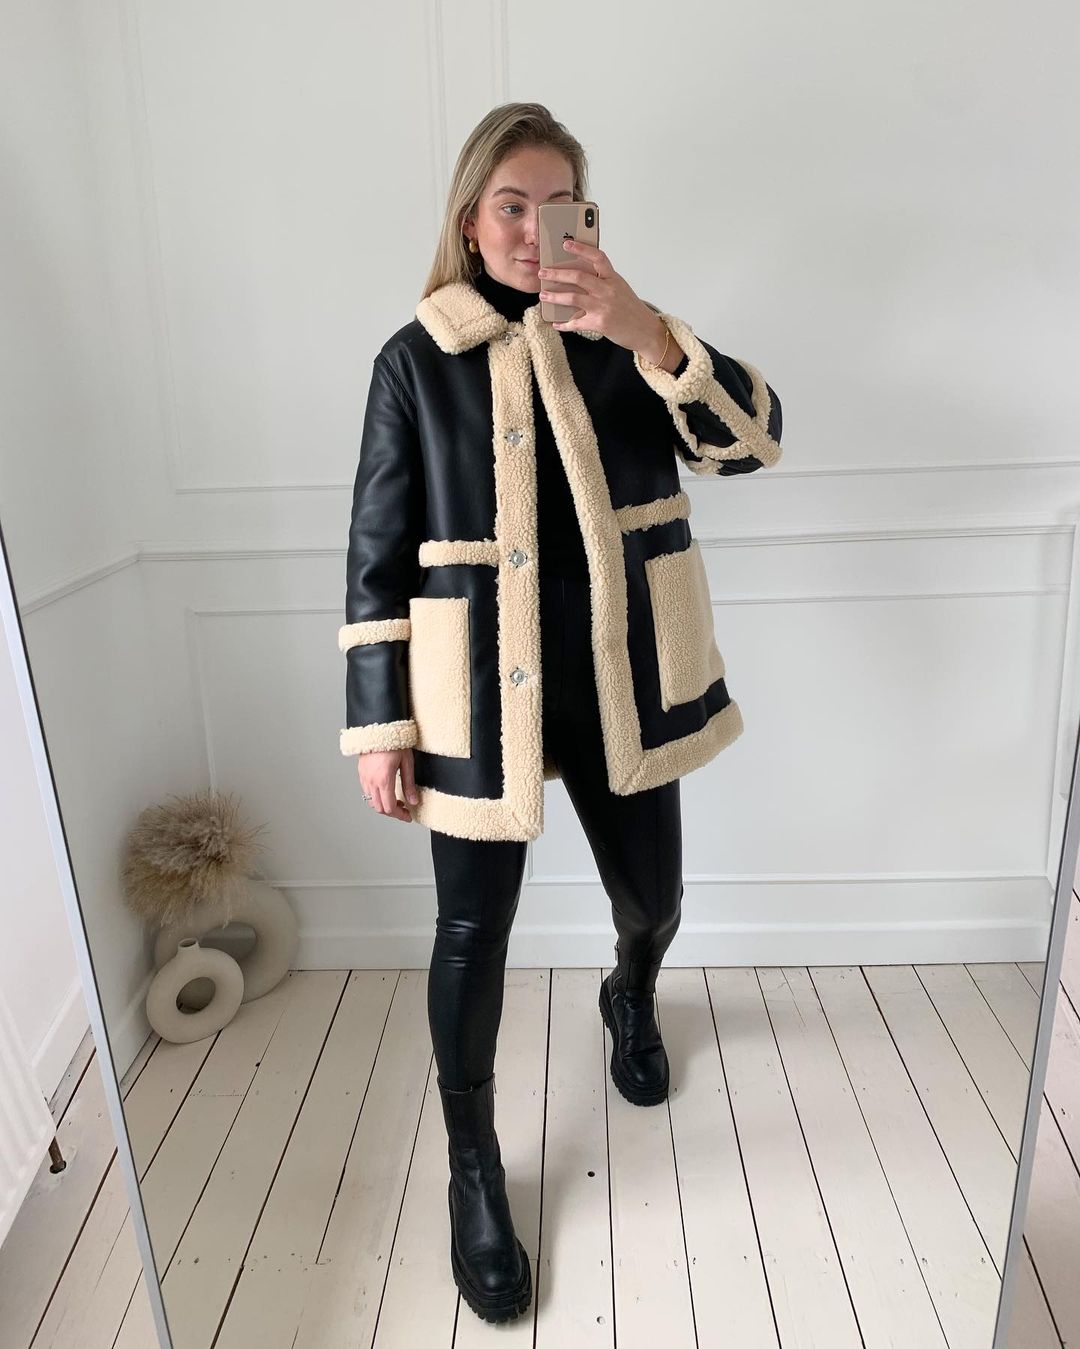 A Shearling Jacket is a Must-Buy for Fall and Winter